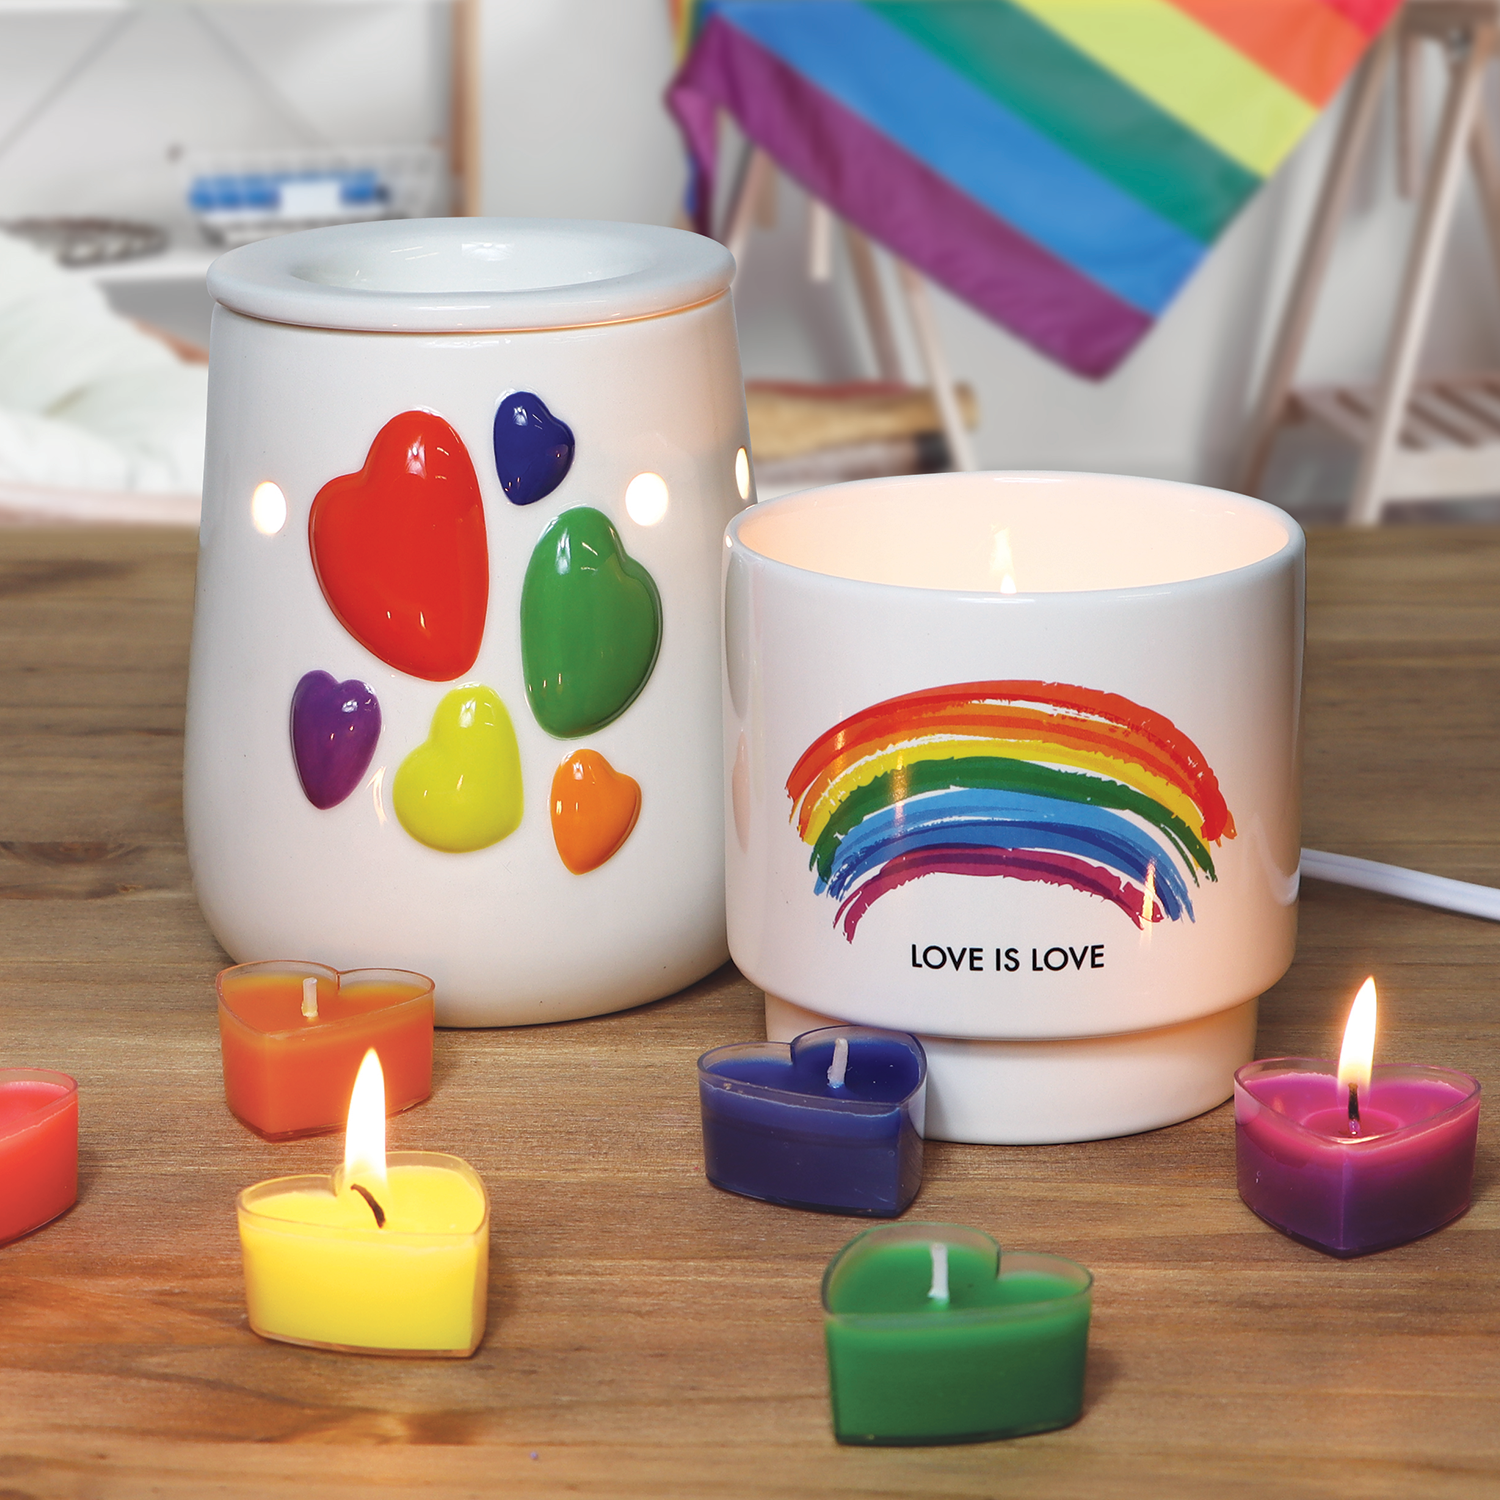 Introducing our new Love is Love Scented Ceramic Candle (10 oz) – Pride Collection candle holder featuring a mesmerizing rainbow candle paired with a delicate heart-shaped lavender candle by Tuscany Candle® SEASONAL.